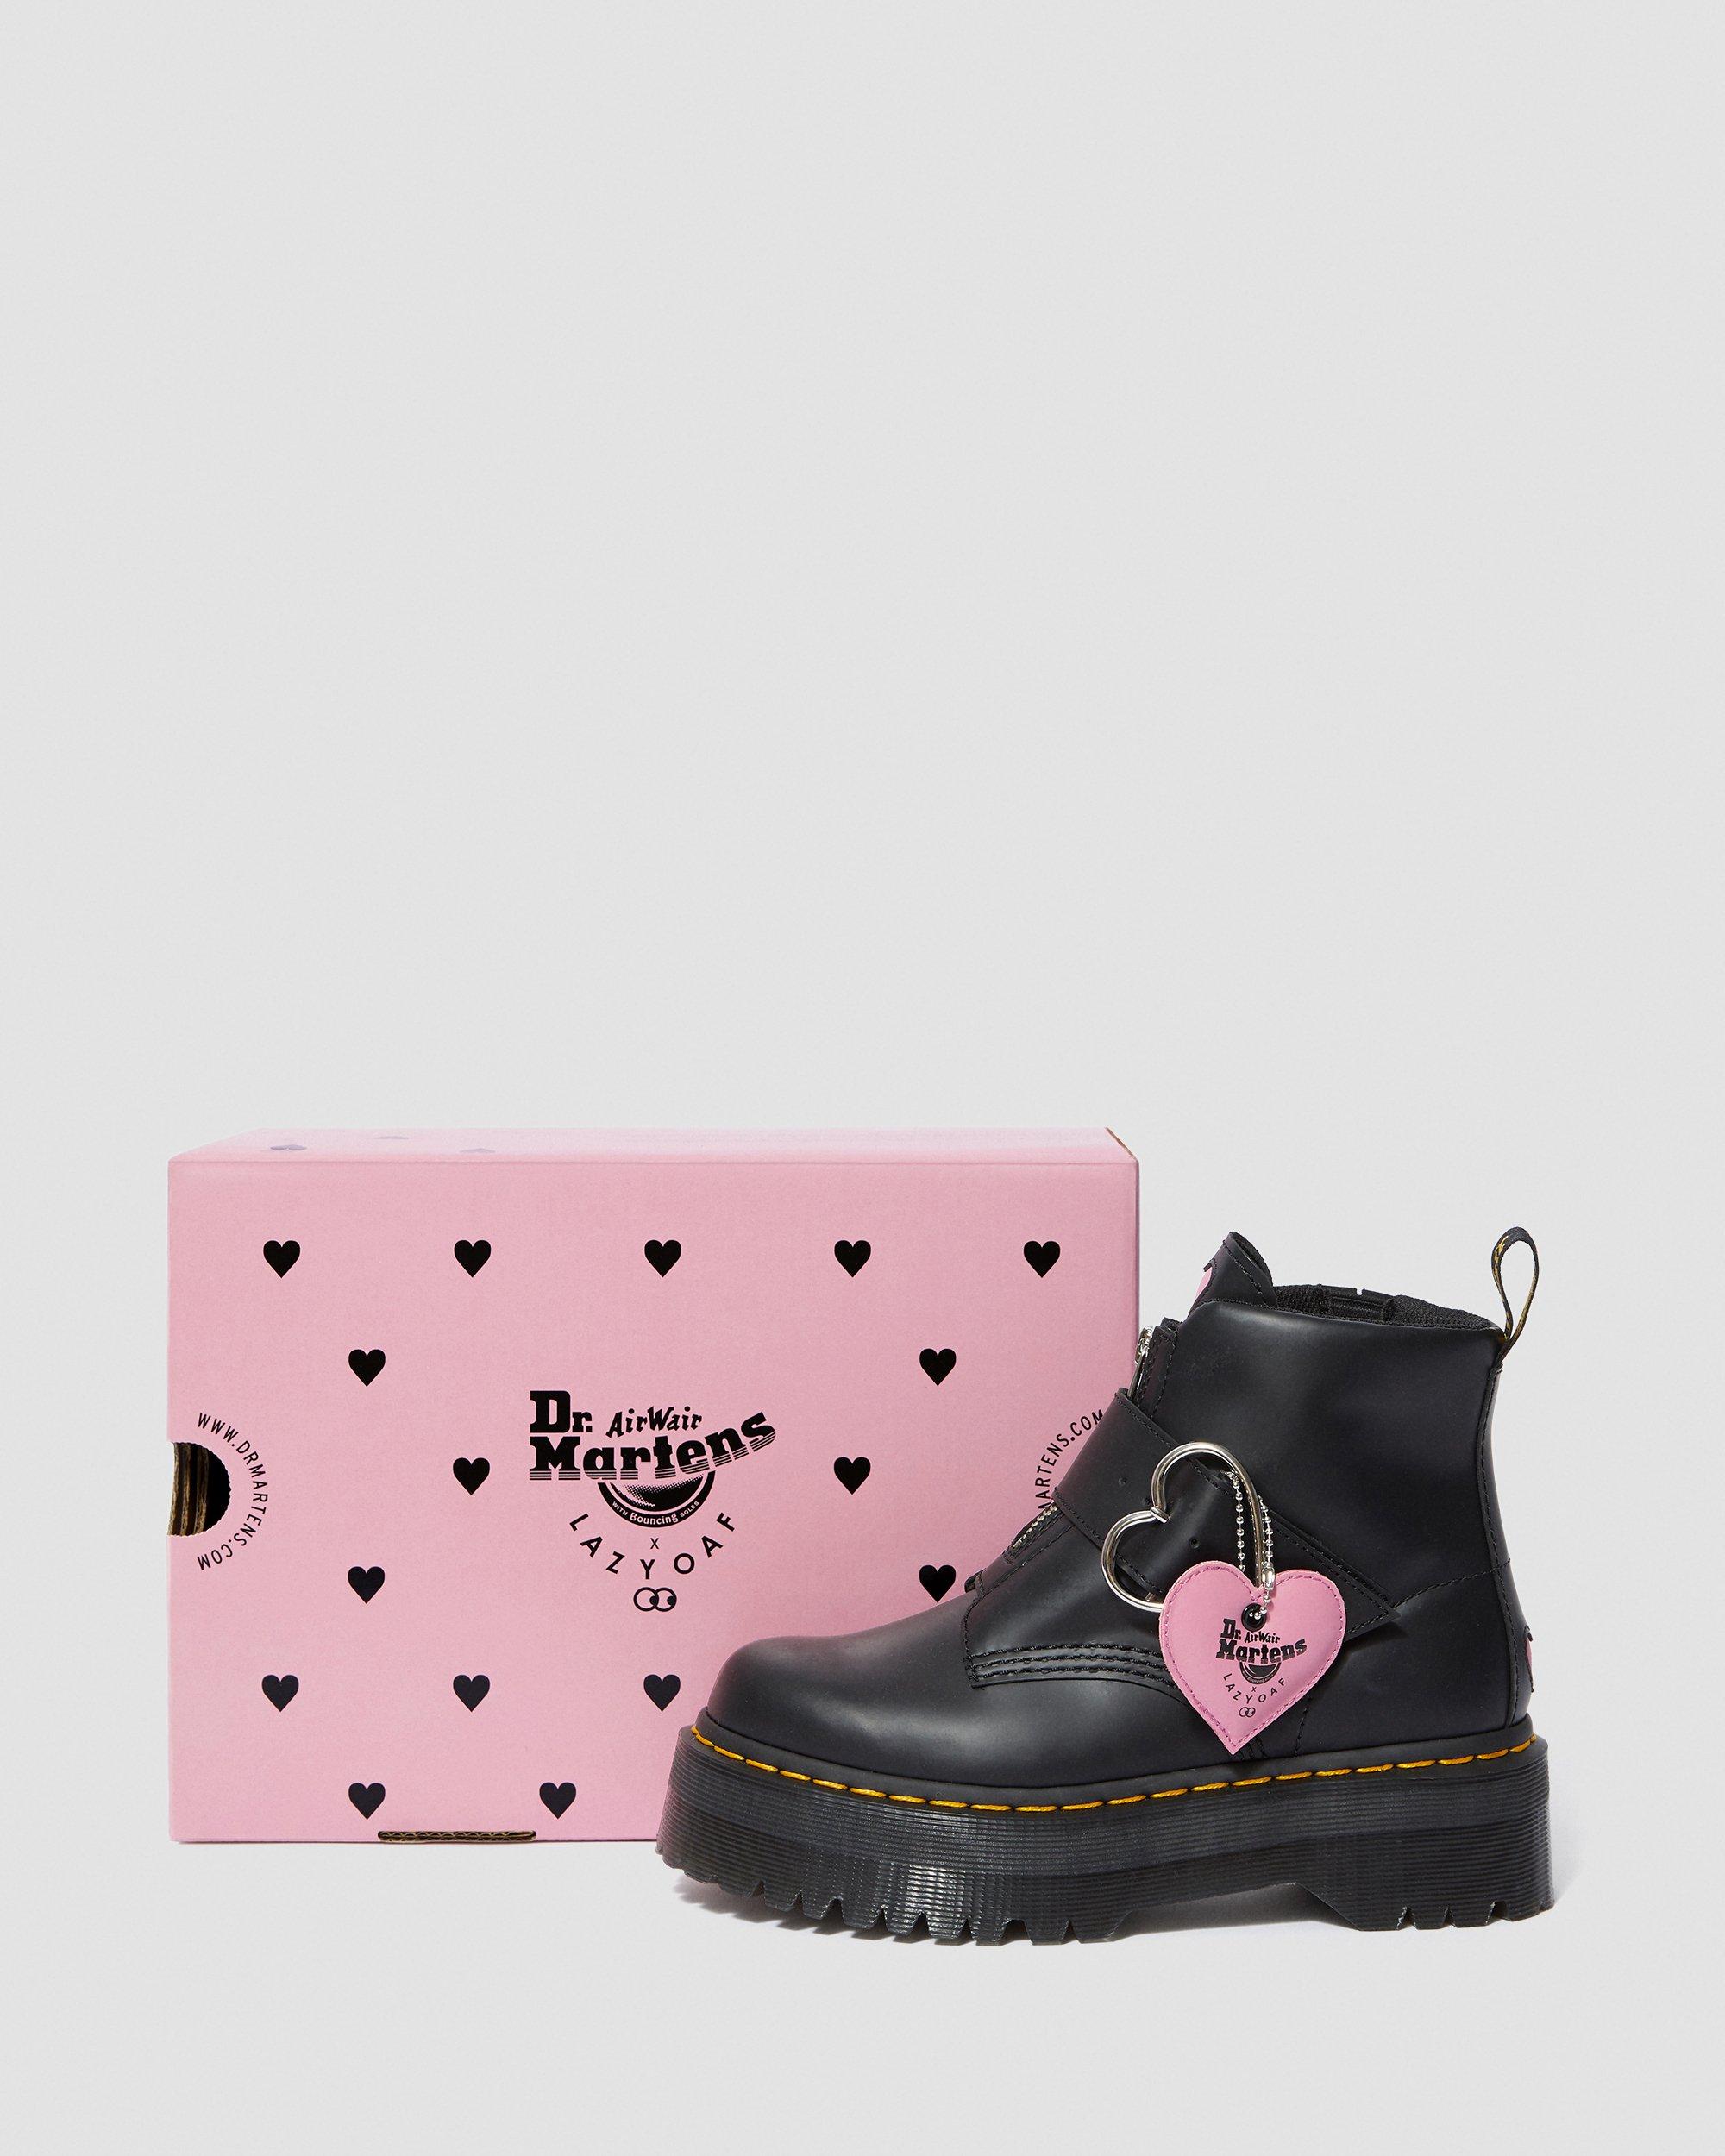 LAZY OAF BUCKLE BOOT | Collaborations 